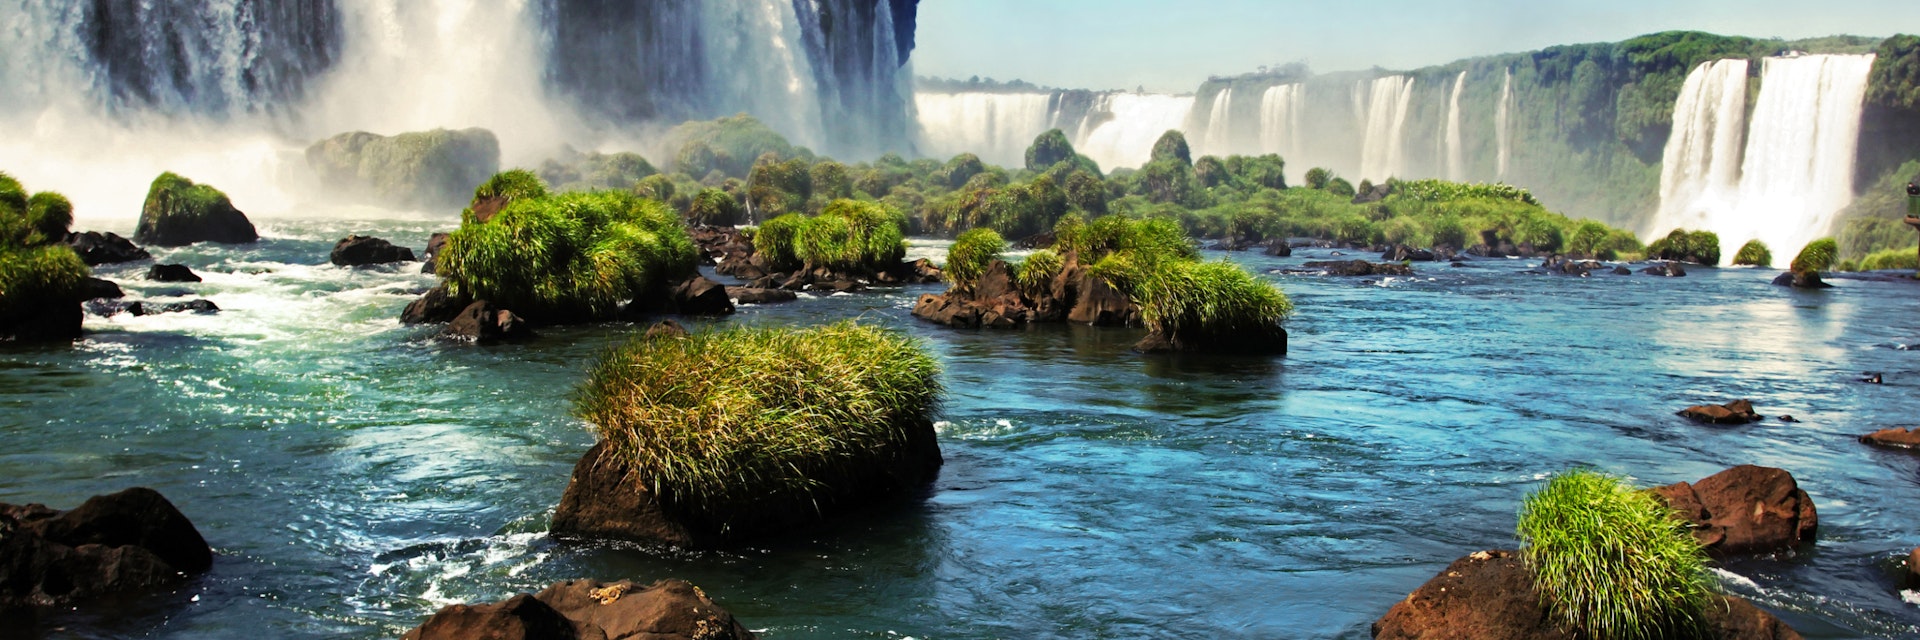 Iguazu falls are waterfalls of the Iguazu River on the border of the Argentina province of Misiones and the Brazilian state of Paraná. The falls divide the river into the upper and lower Iguazu. The Iguazu River rises near the city of Curitiba. The river flows through Brazil for most of its course, although most of the falls are on the Argentine side. Below its confluence with the San Antonio River, the Iguazu River forms the boundary between Argentina and Brazil.